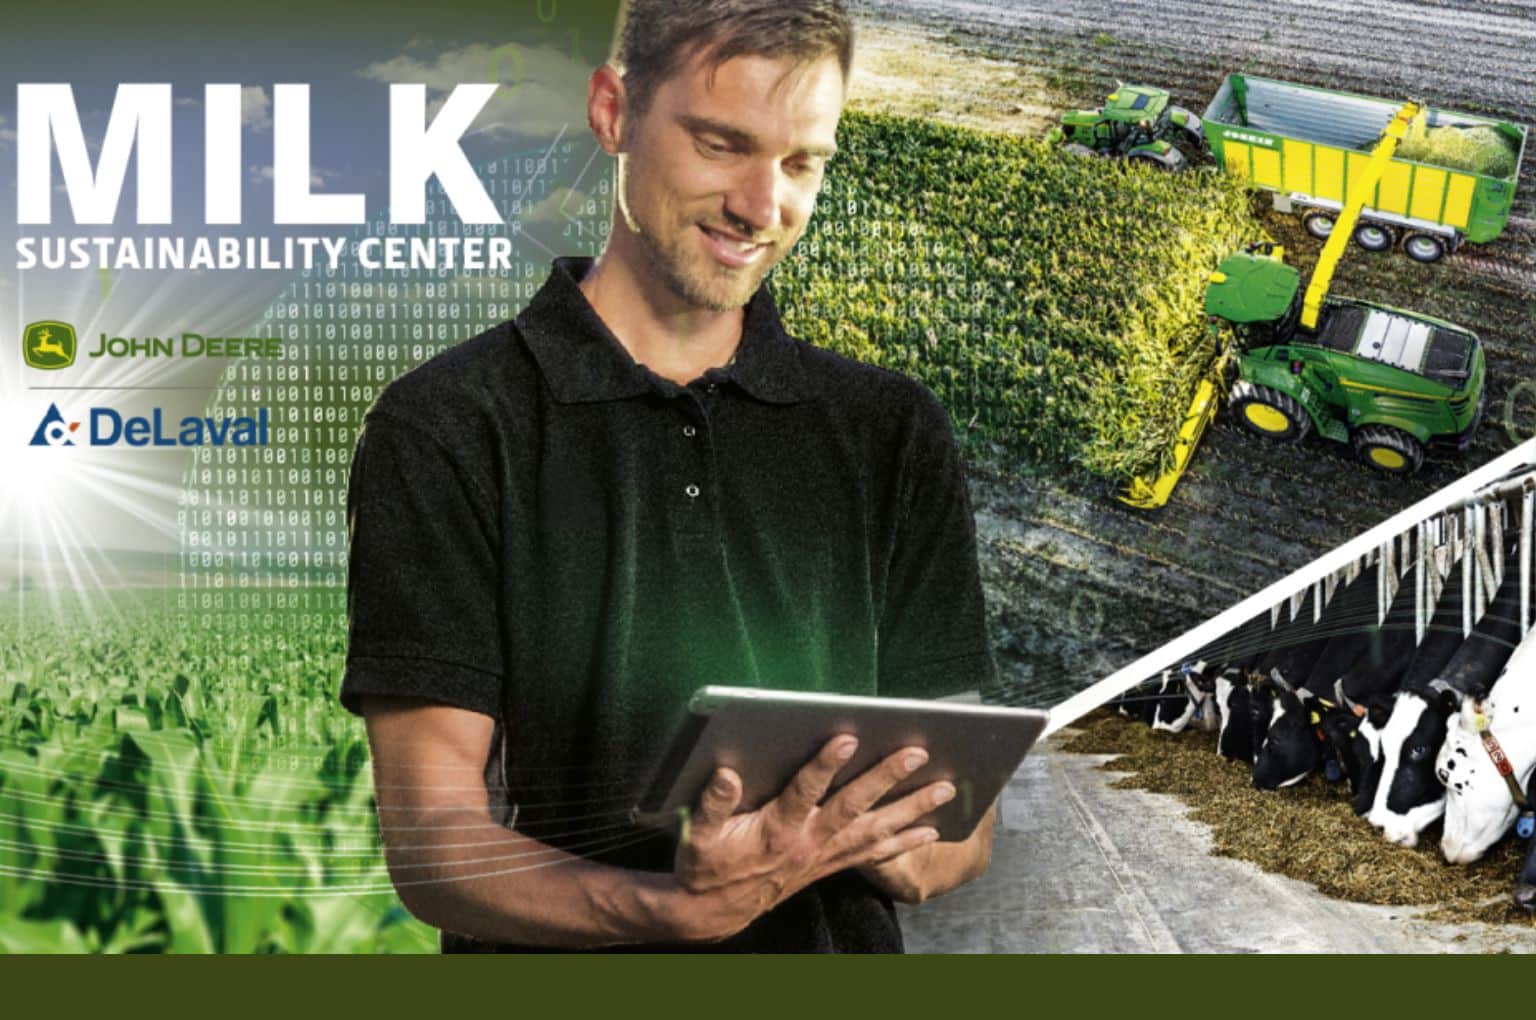 Deere and DeLaval into partnership